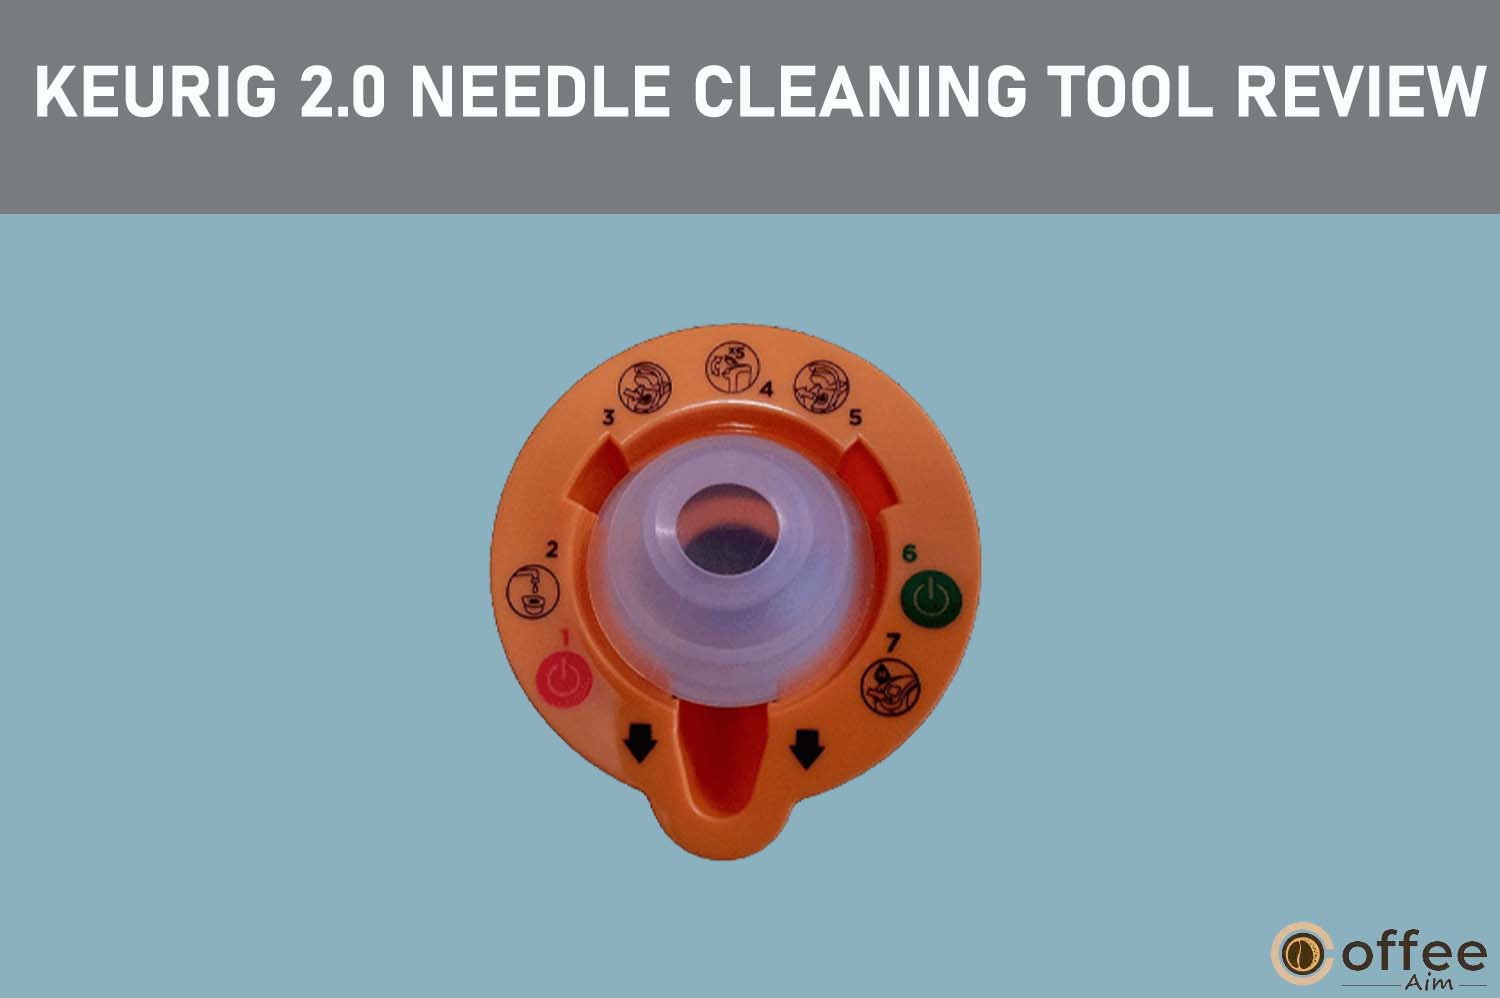 Featured image for the article "Keurig 2.0 Needle Cleaning Tool Review"